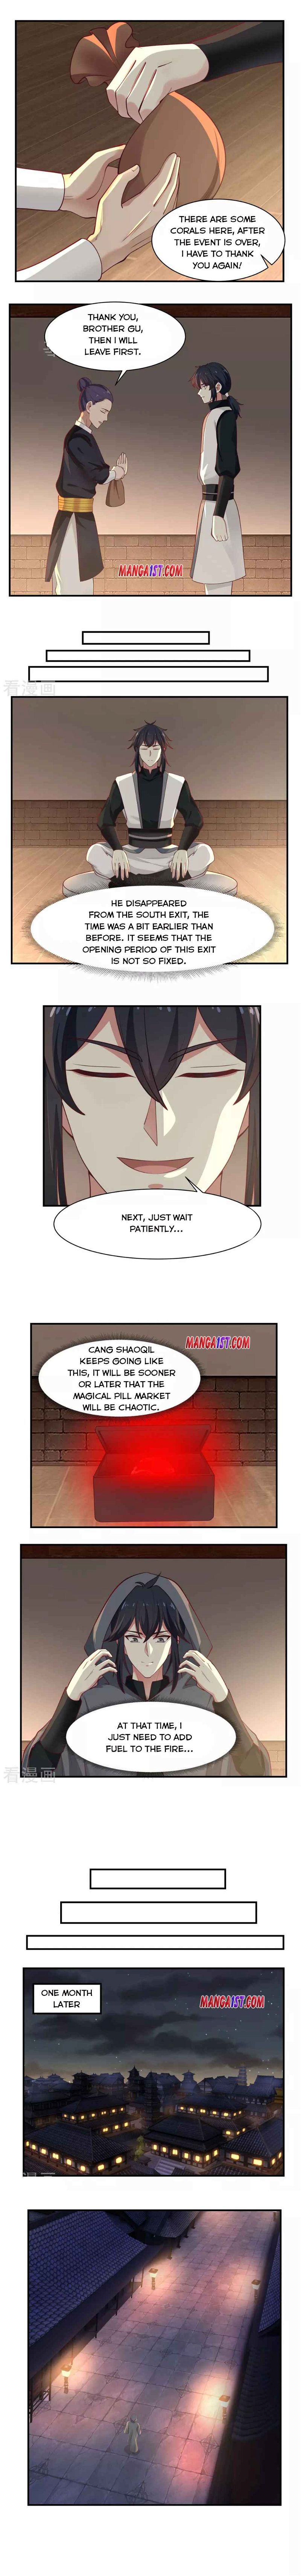 Chaos Alchemist Chapter 180 page 3